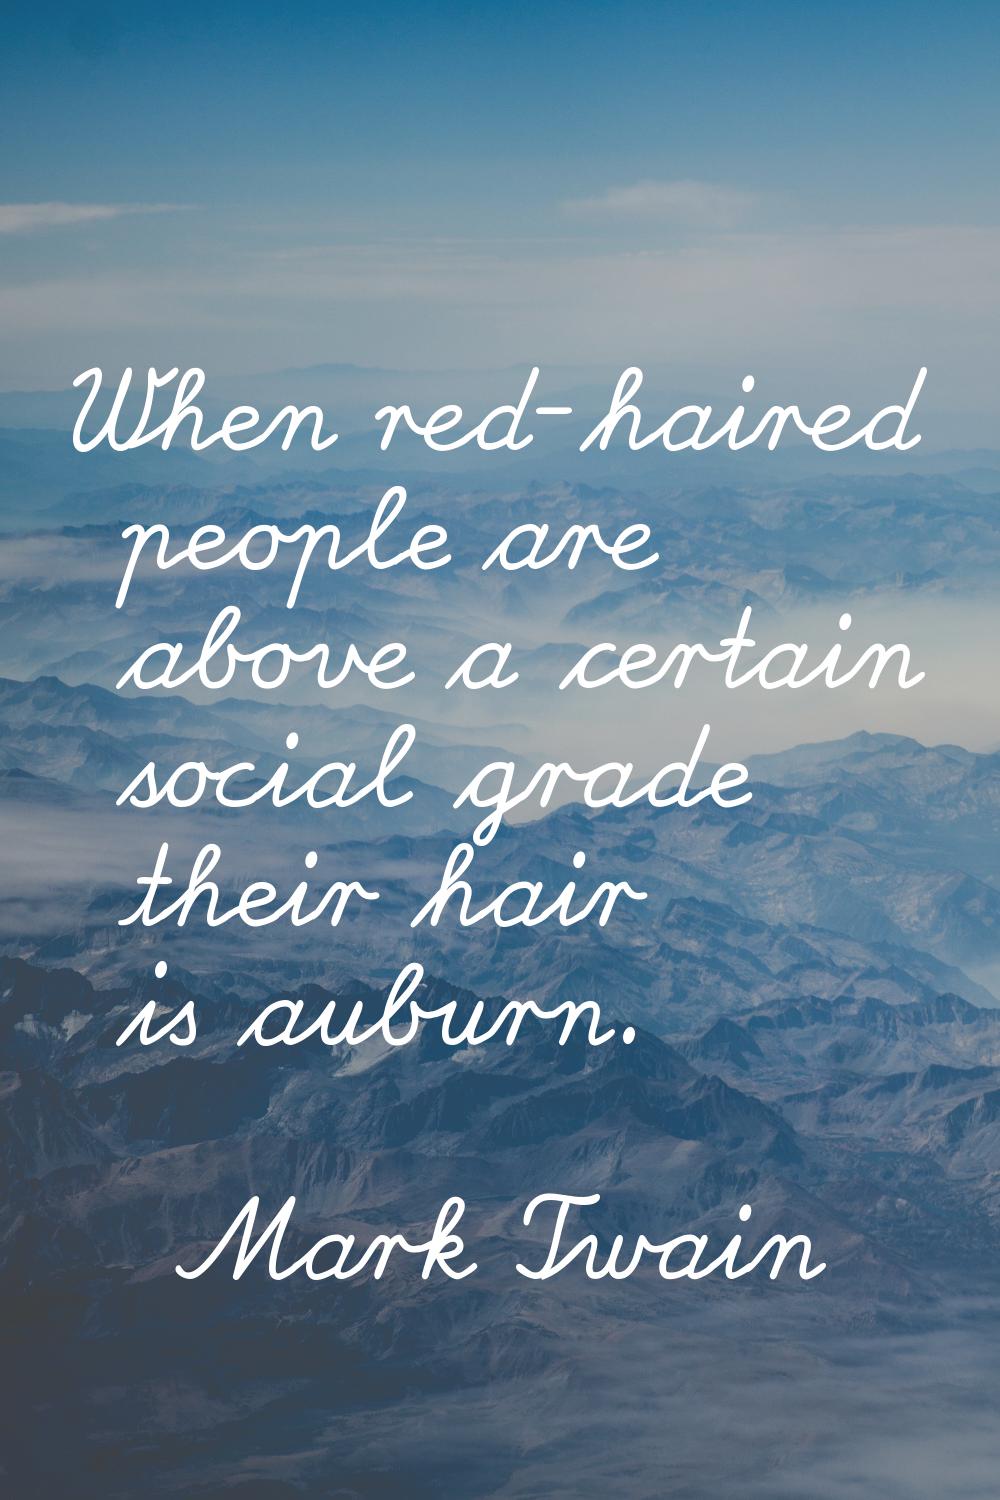 When red-haired people are above a certain social grade their hair is auburn.